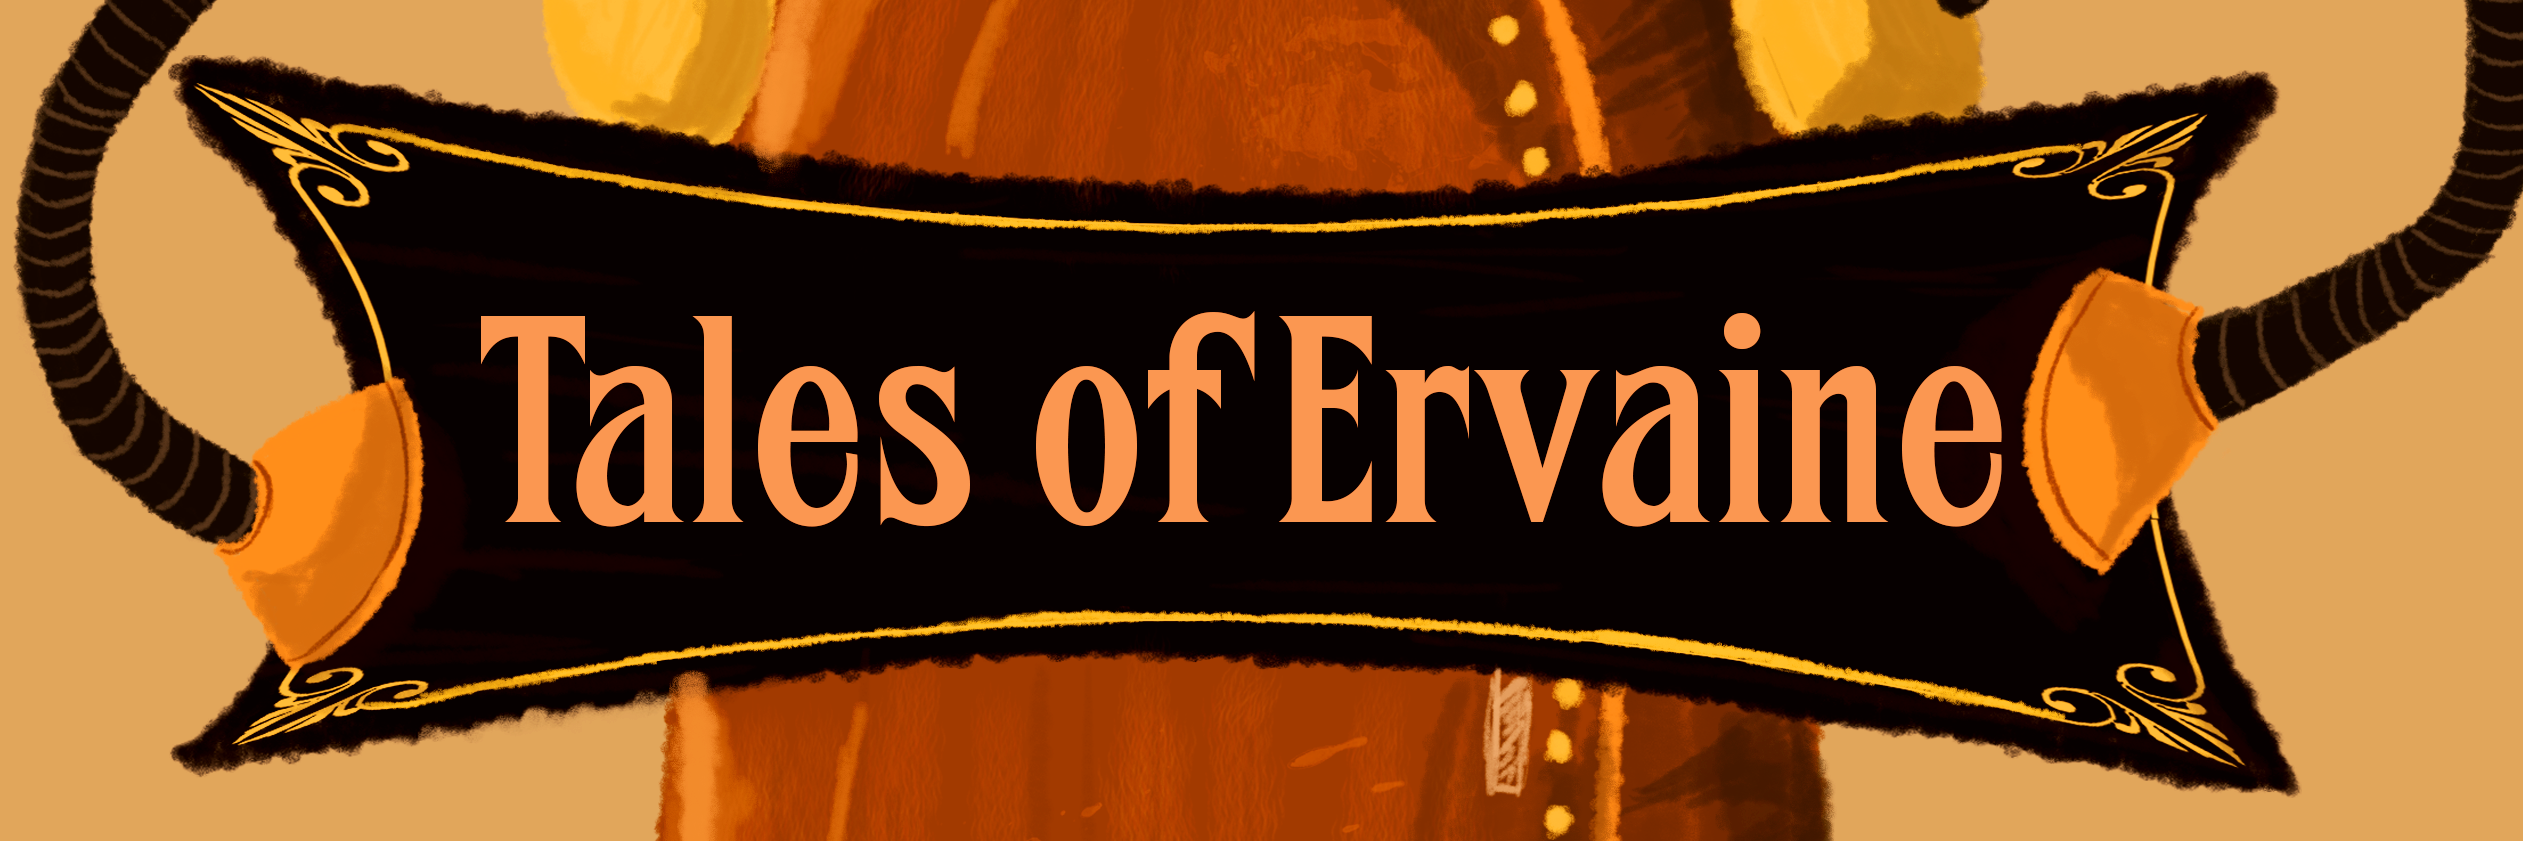 Tales of Ervaine